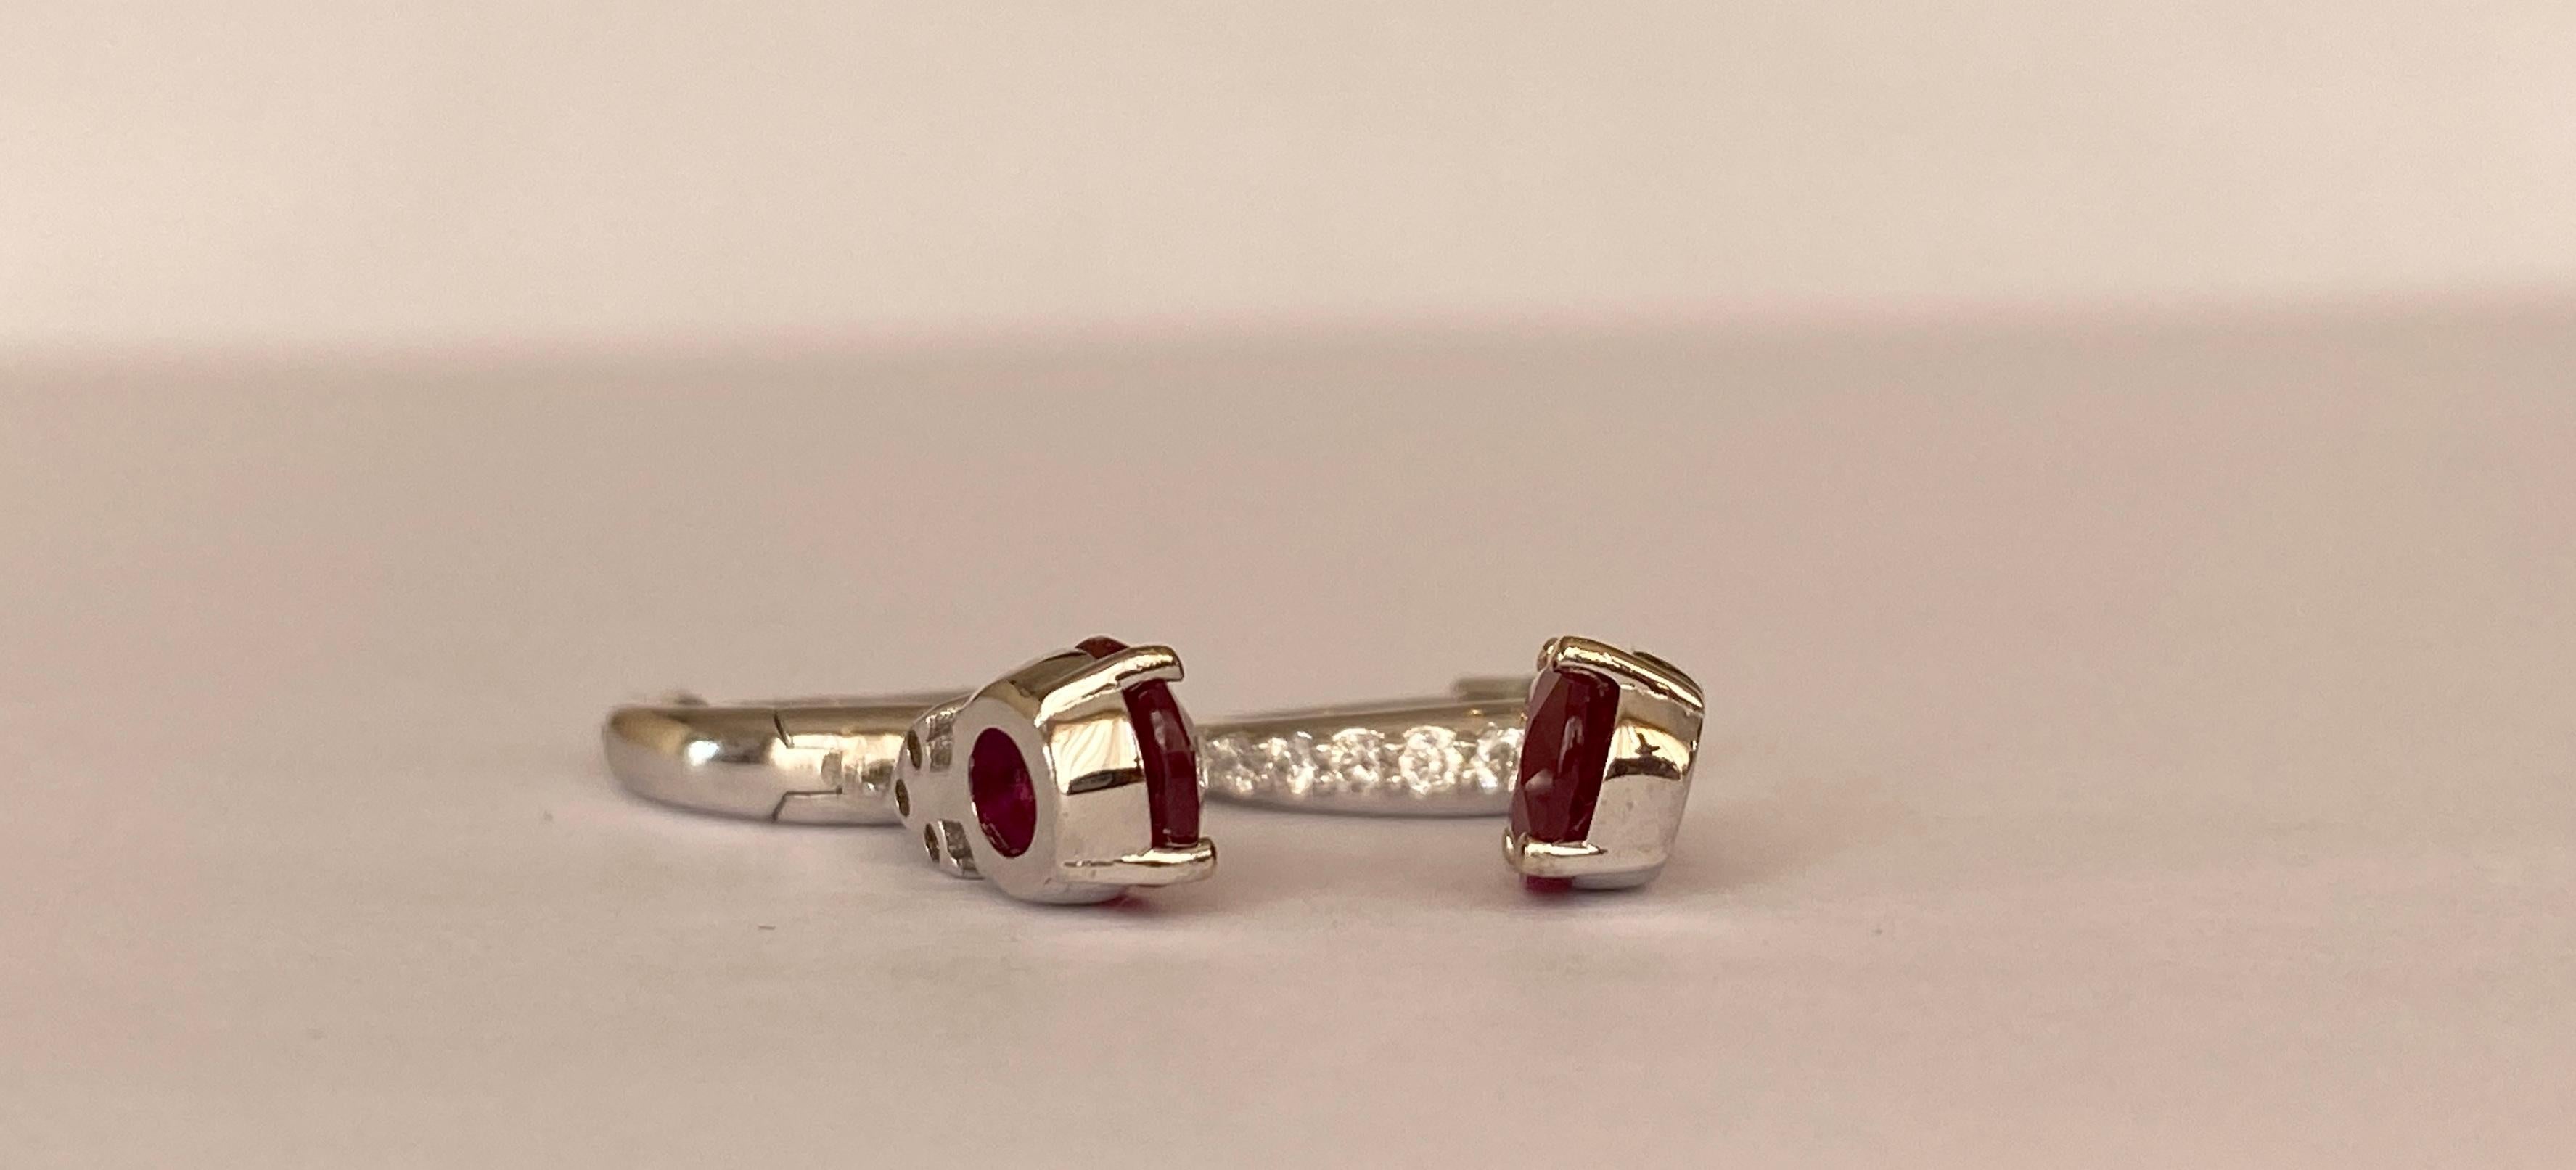 ALGT Certified 18 Kt. White Gold Earrings with 2.28 Ct Rubies and Diamonds For Sale 7